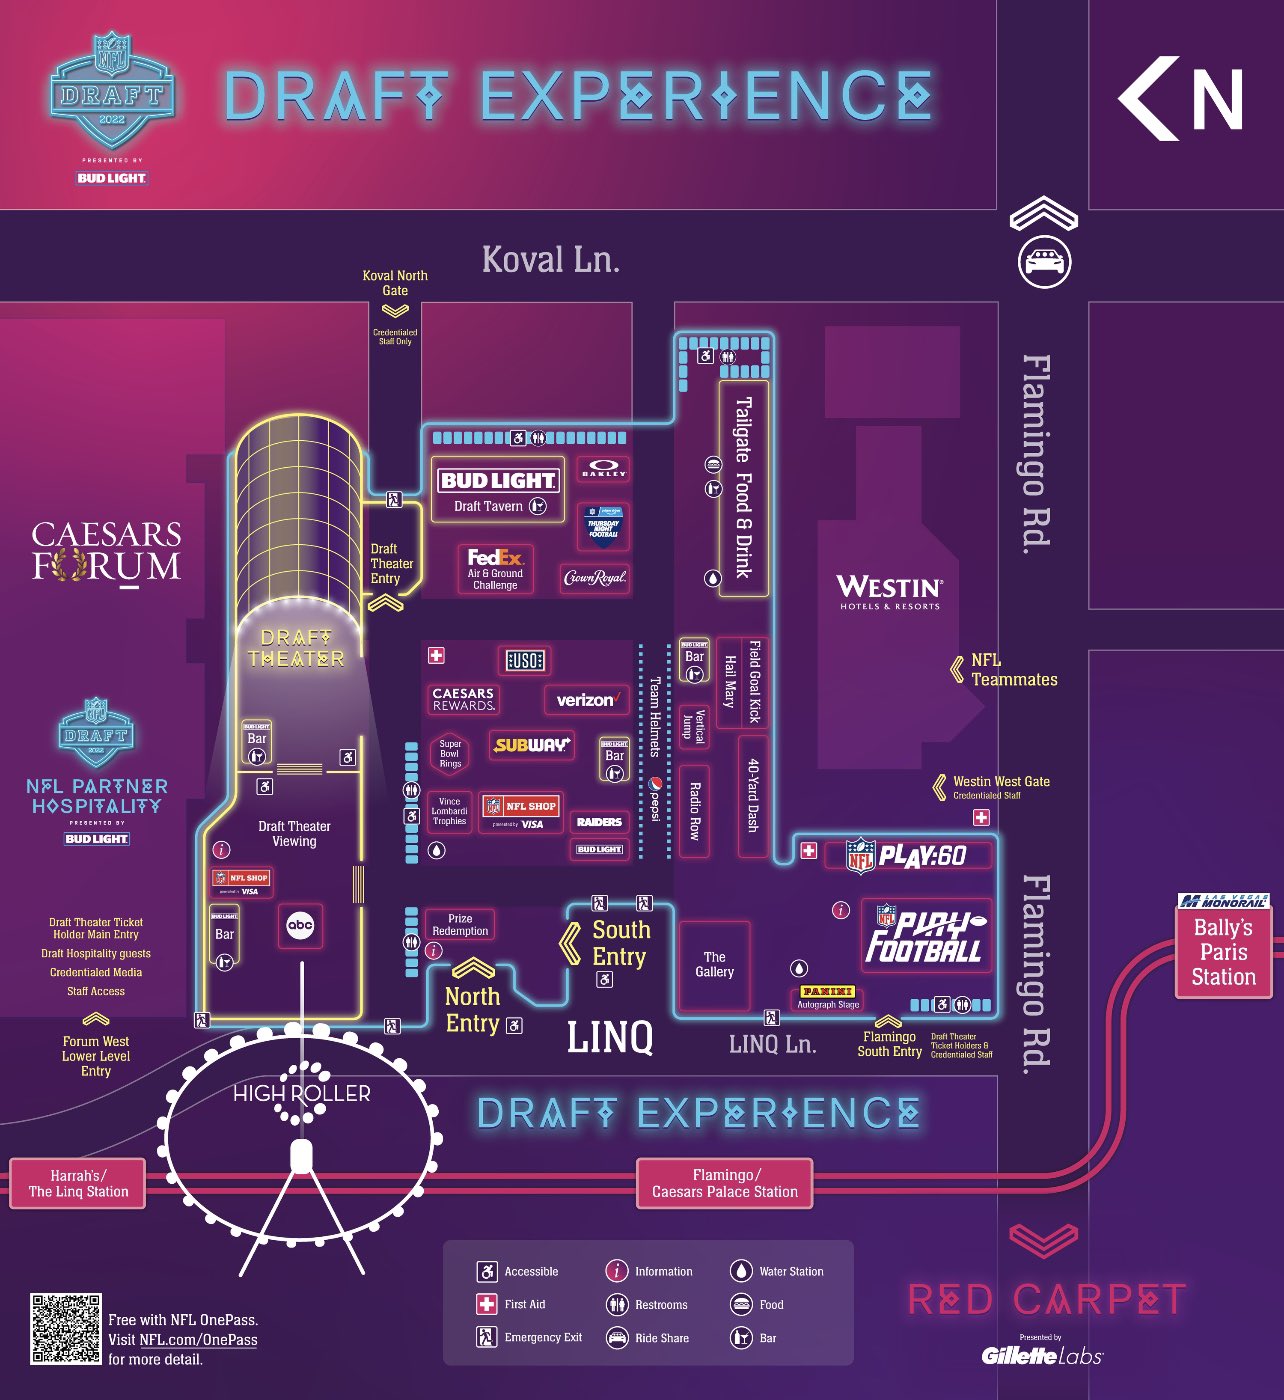 Mick Akers on X: Here's the NFL Experience map for next week's